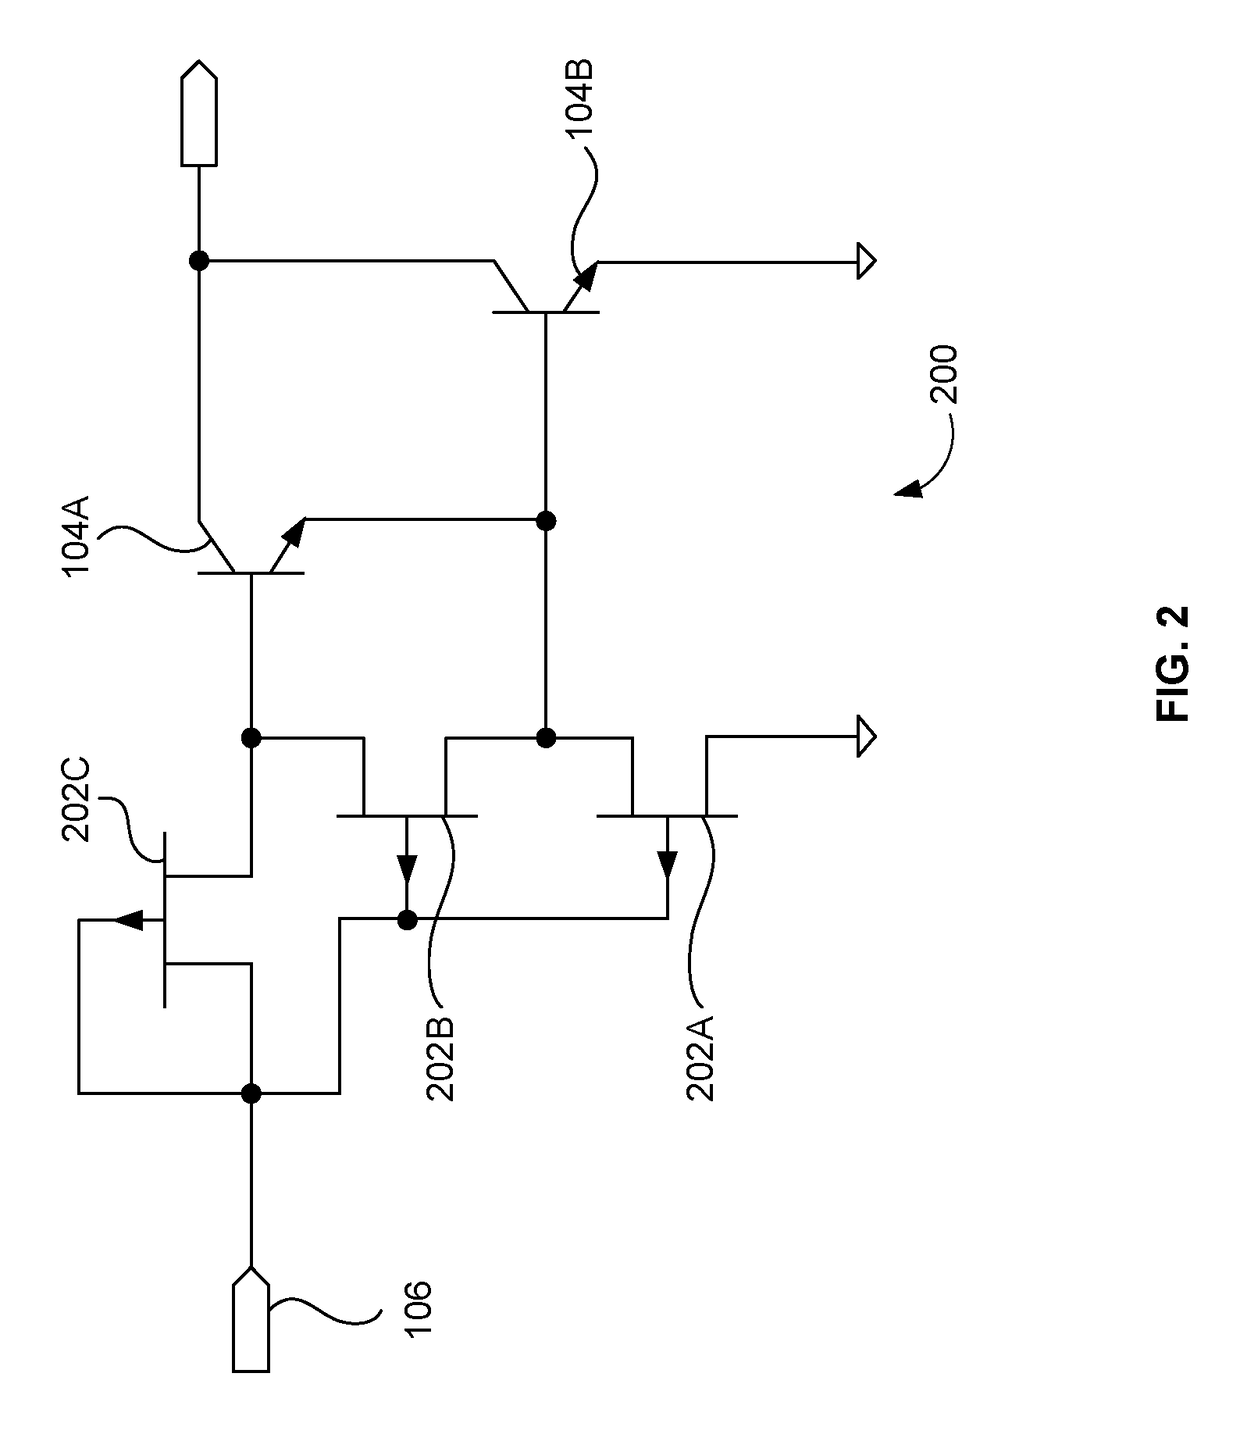 Configuration of JFET for base drive bipolar junction transistor with automatic compensation of beta variation